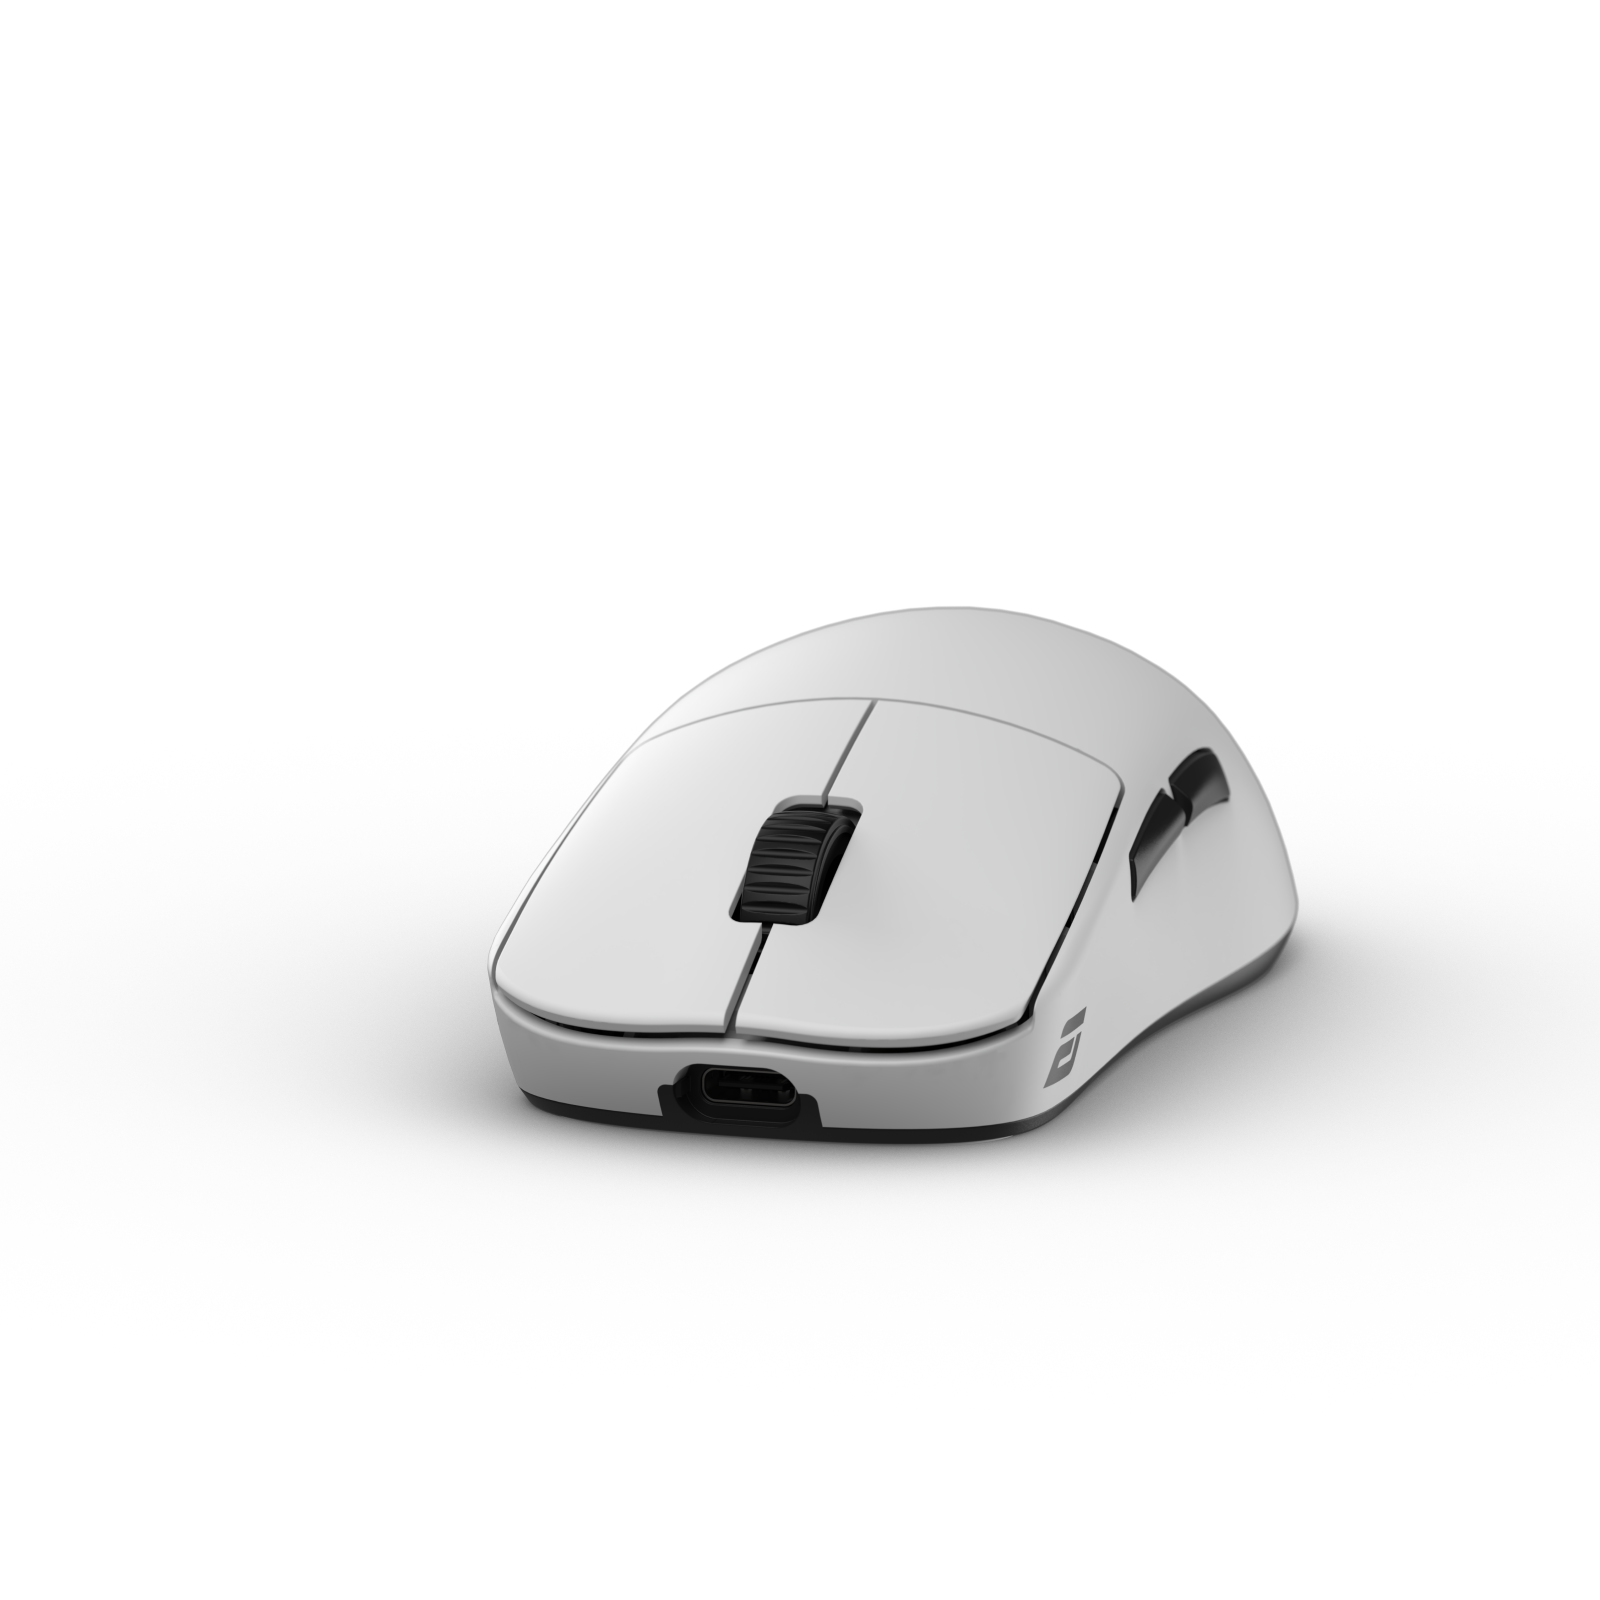 Endgame gear OP1we Gaming Mouse White